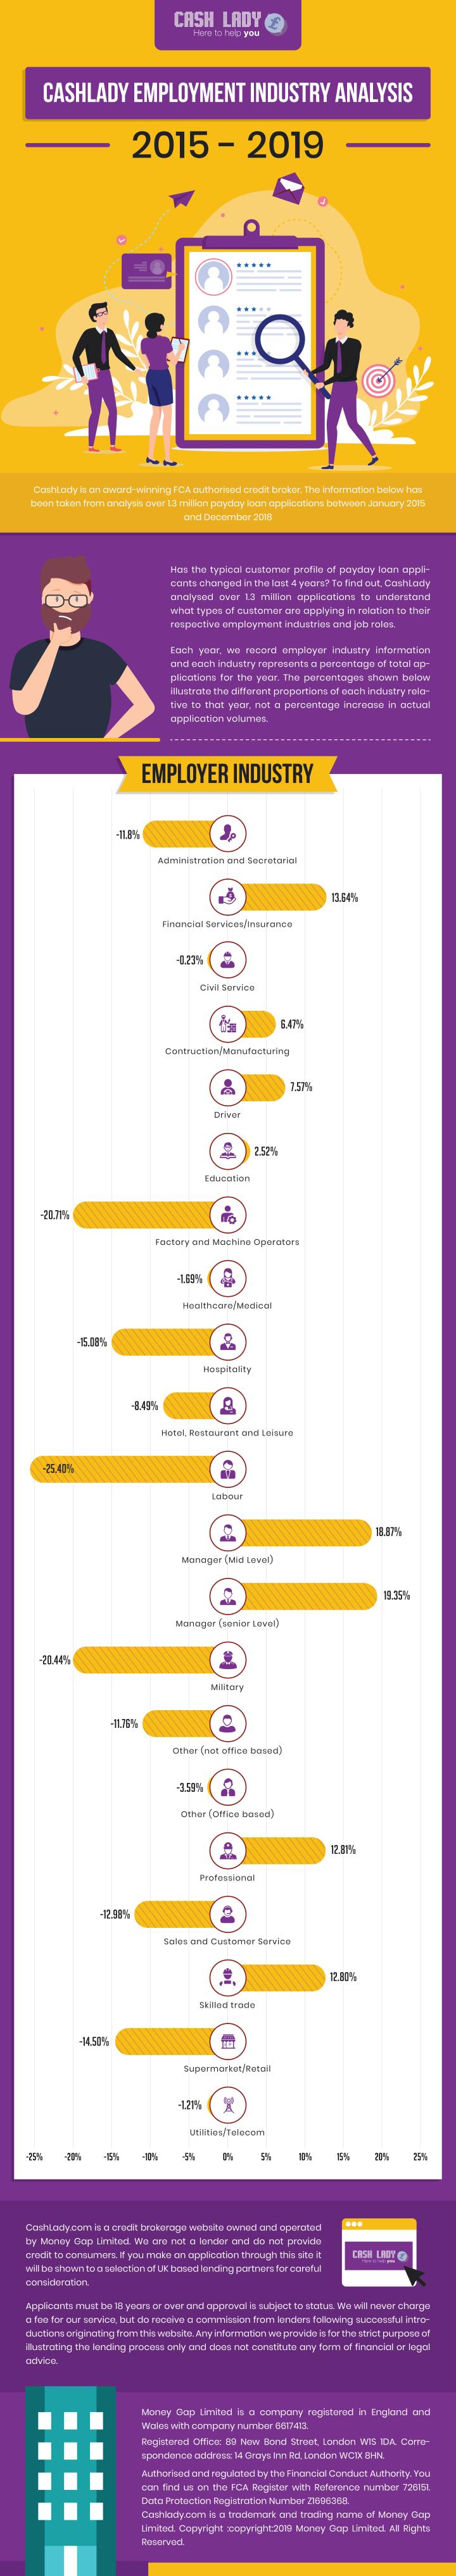 UK Employment Industry Analysis for Short Term Loans 2015-2019 Infographics